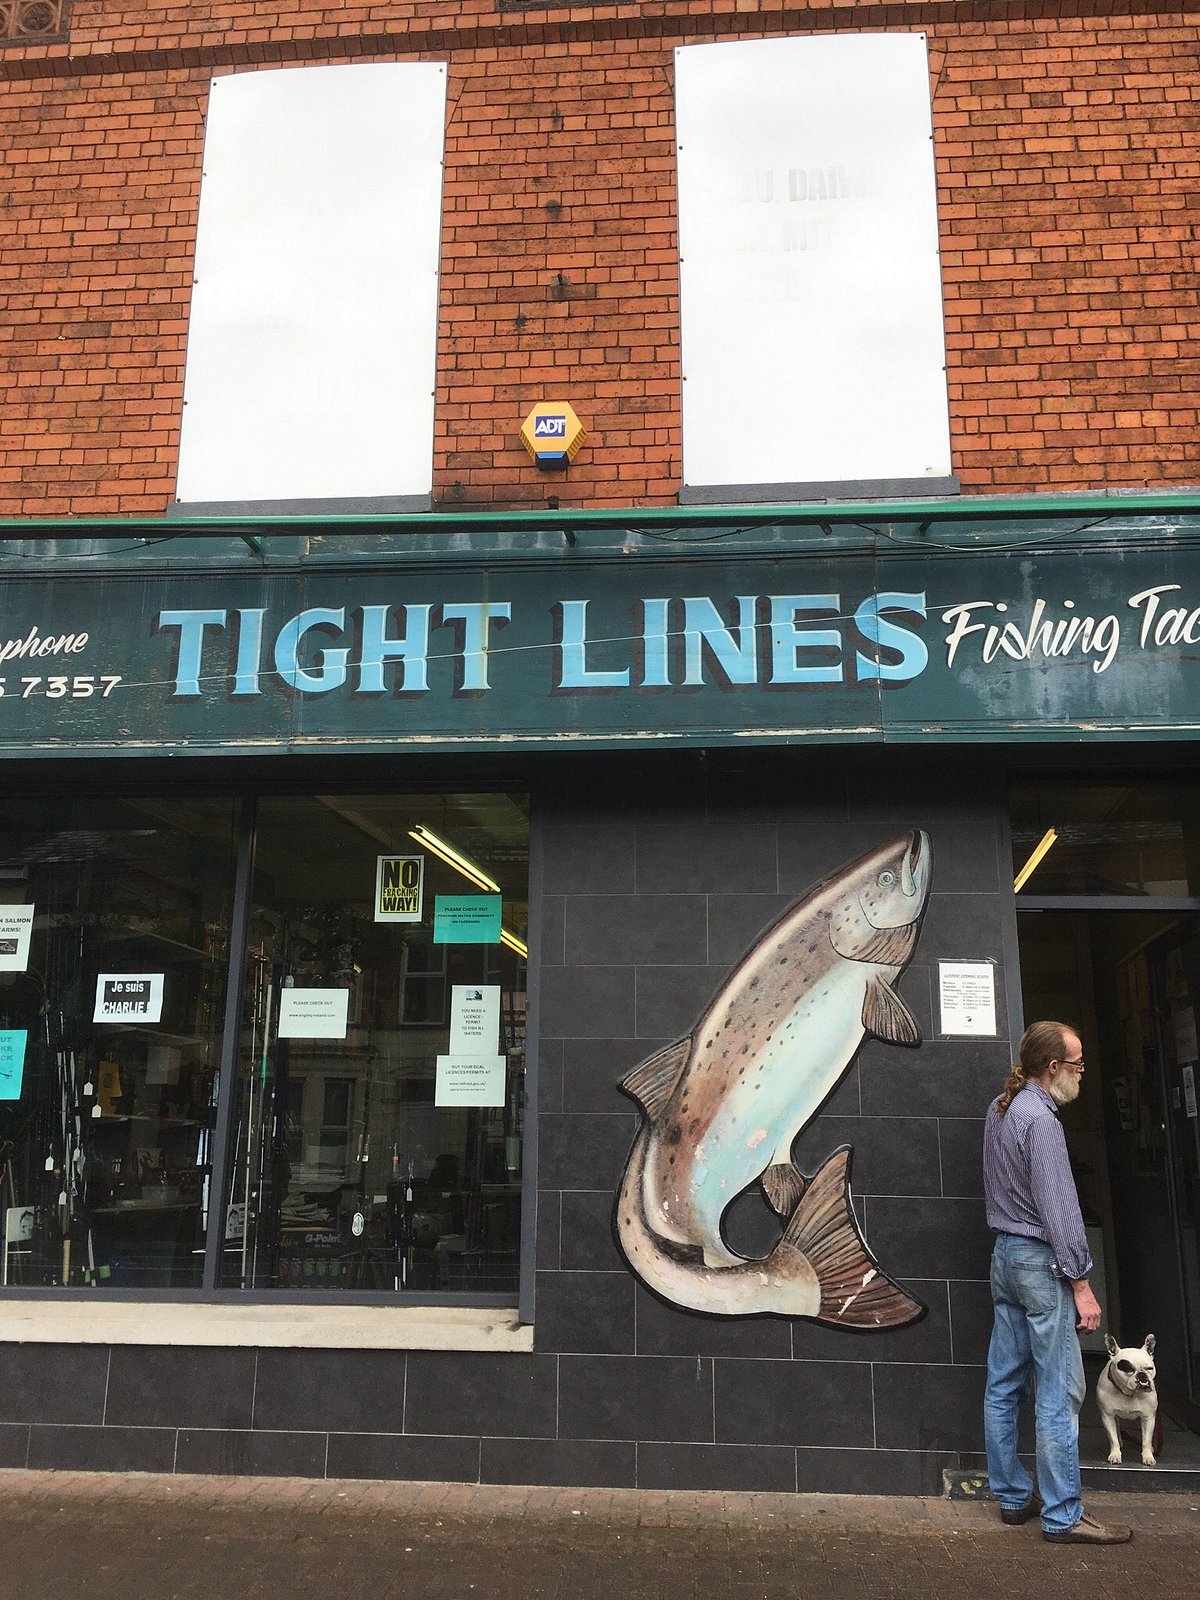 TIGHT LINES: All You Need to Know BEFORE You Go (with Photos)